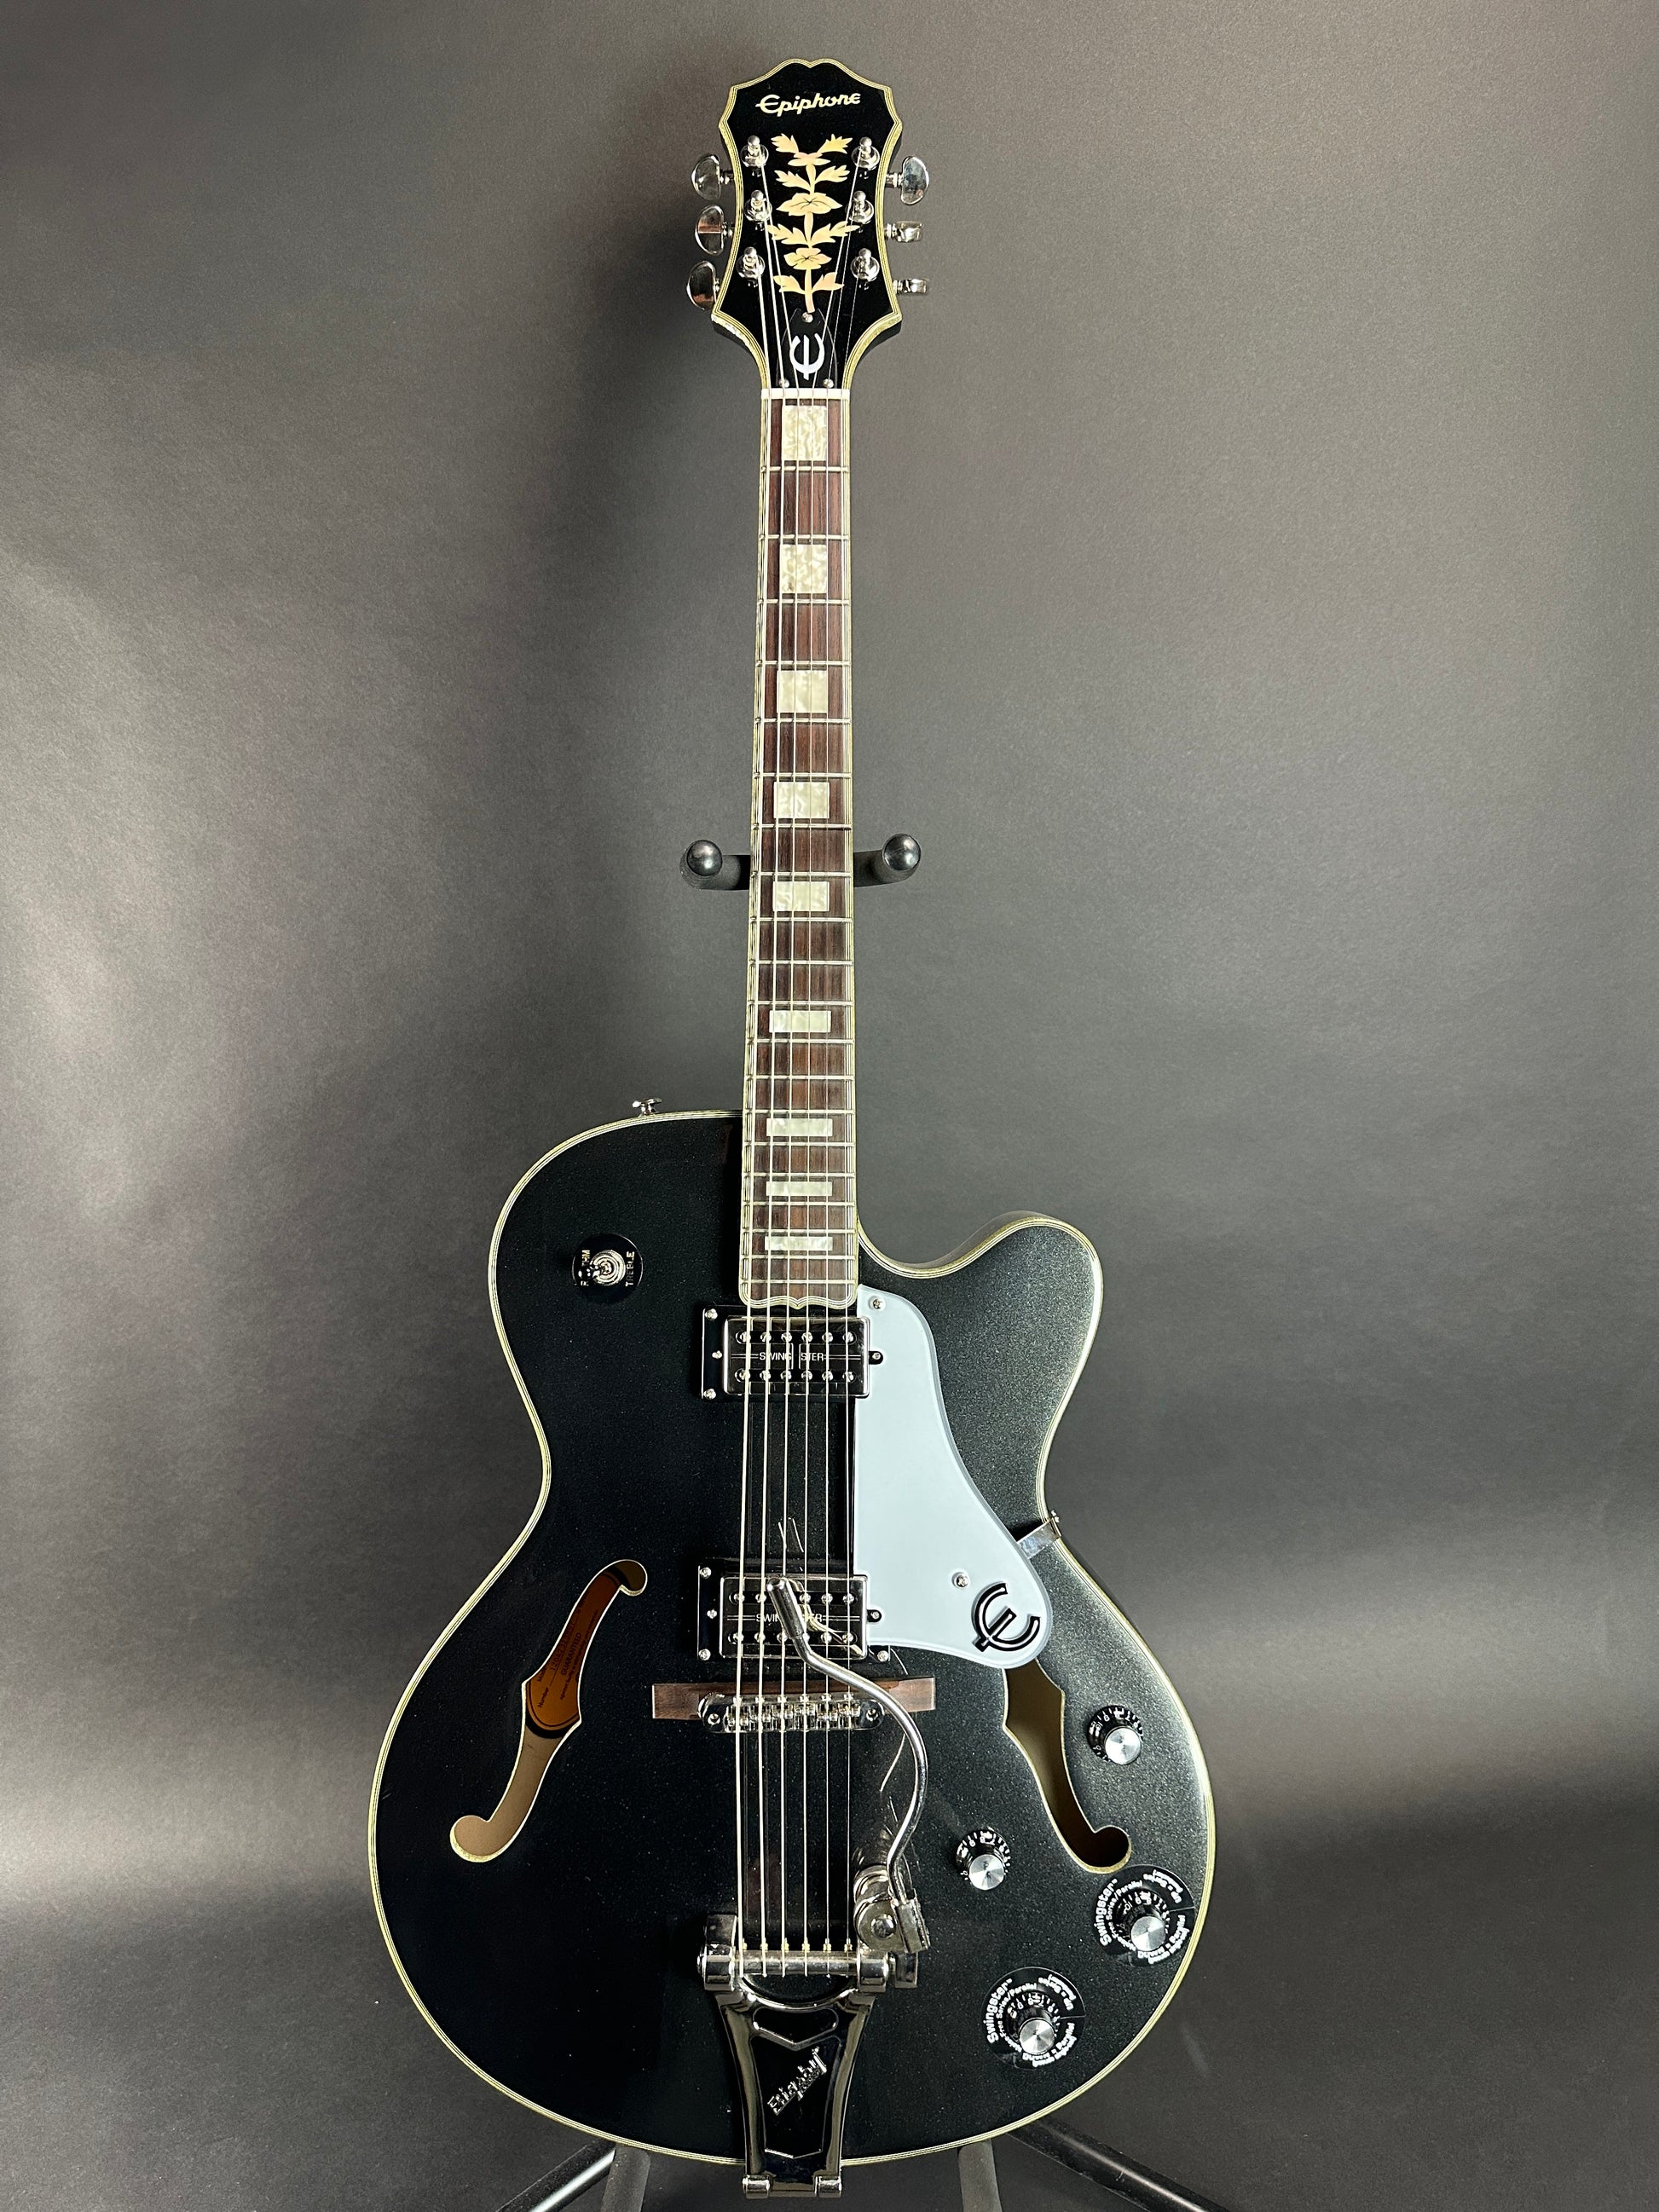 Full front of Used Epiphone Emperor Swingster Black.